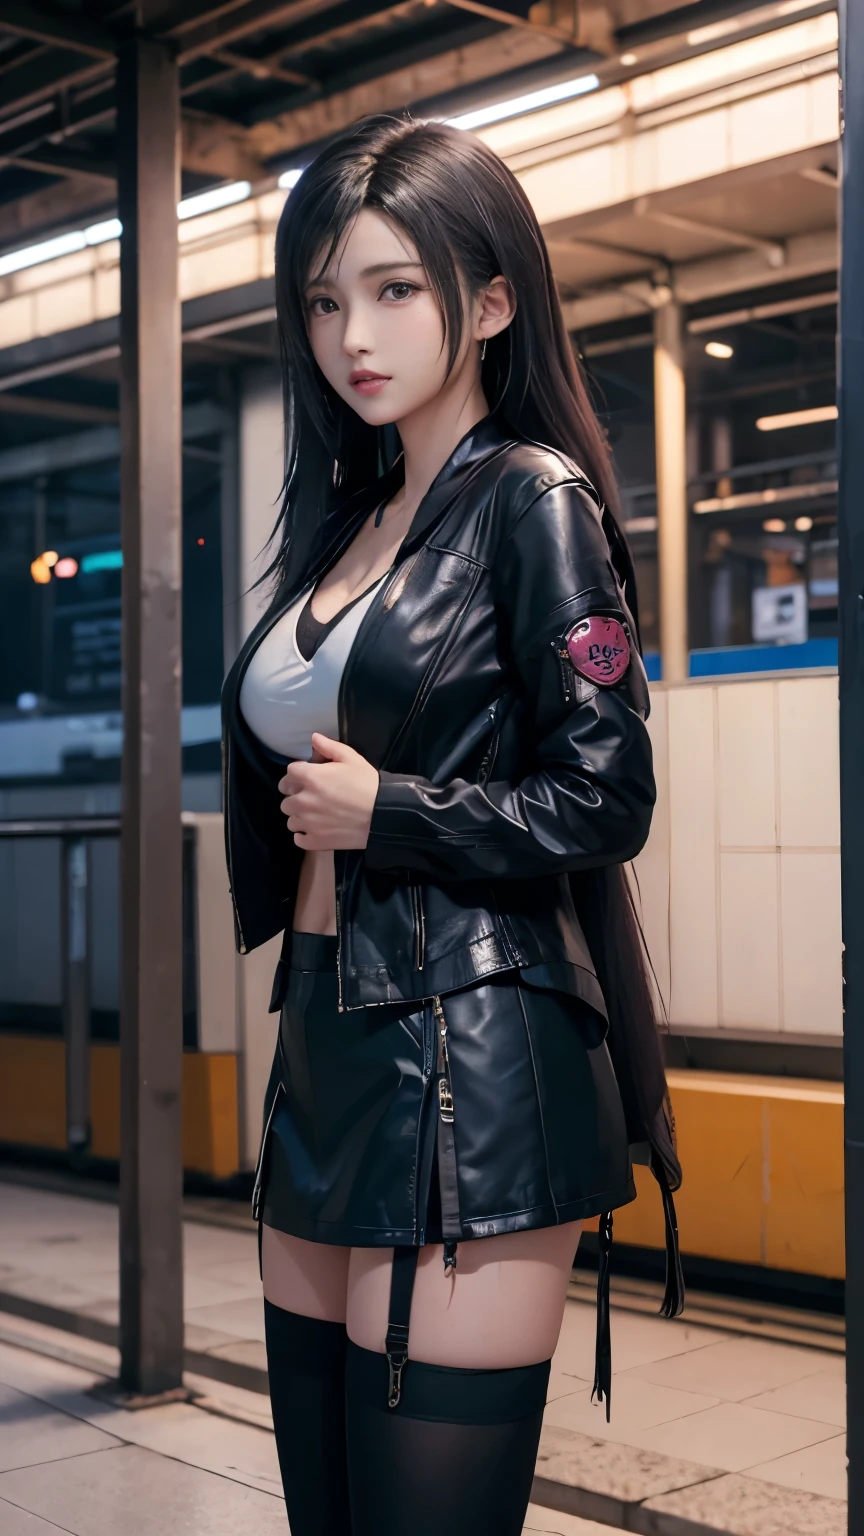 8K resolution, masterpiece, Highest quality, Award-winning works, unrealistic, tifa lockhart, 20-year-old, sexy office lady, (black long hair:1.3), beautiful Perfect Face, Soft Skin, Perfect Face, Yasutomo Oka's painting style, 165cm tall, Three sizes are 92/60/88, (black jacket:1.5), white silk camisole, deep Cleavage, black long slacks, black garter belts, knee high socks, black pumps, details, Splash screen,Sharp eyes, crystal blue eyes, pink lips, BREAK, White Silver, dynamic sexy poses, Sweat, Strong winds, standing alone on station platform, waiting for train coming, Osaka Japan